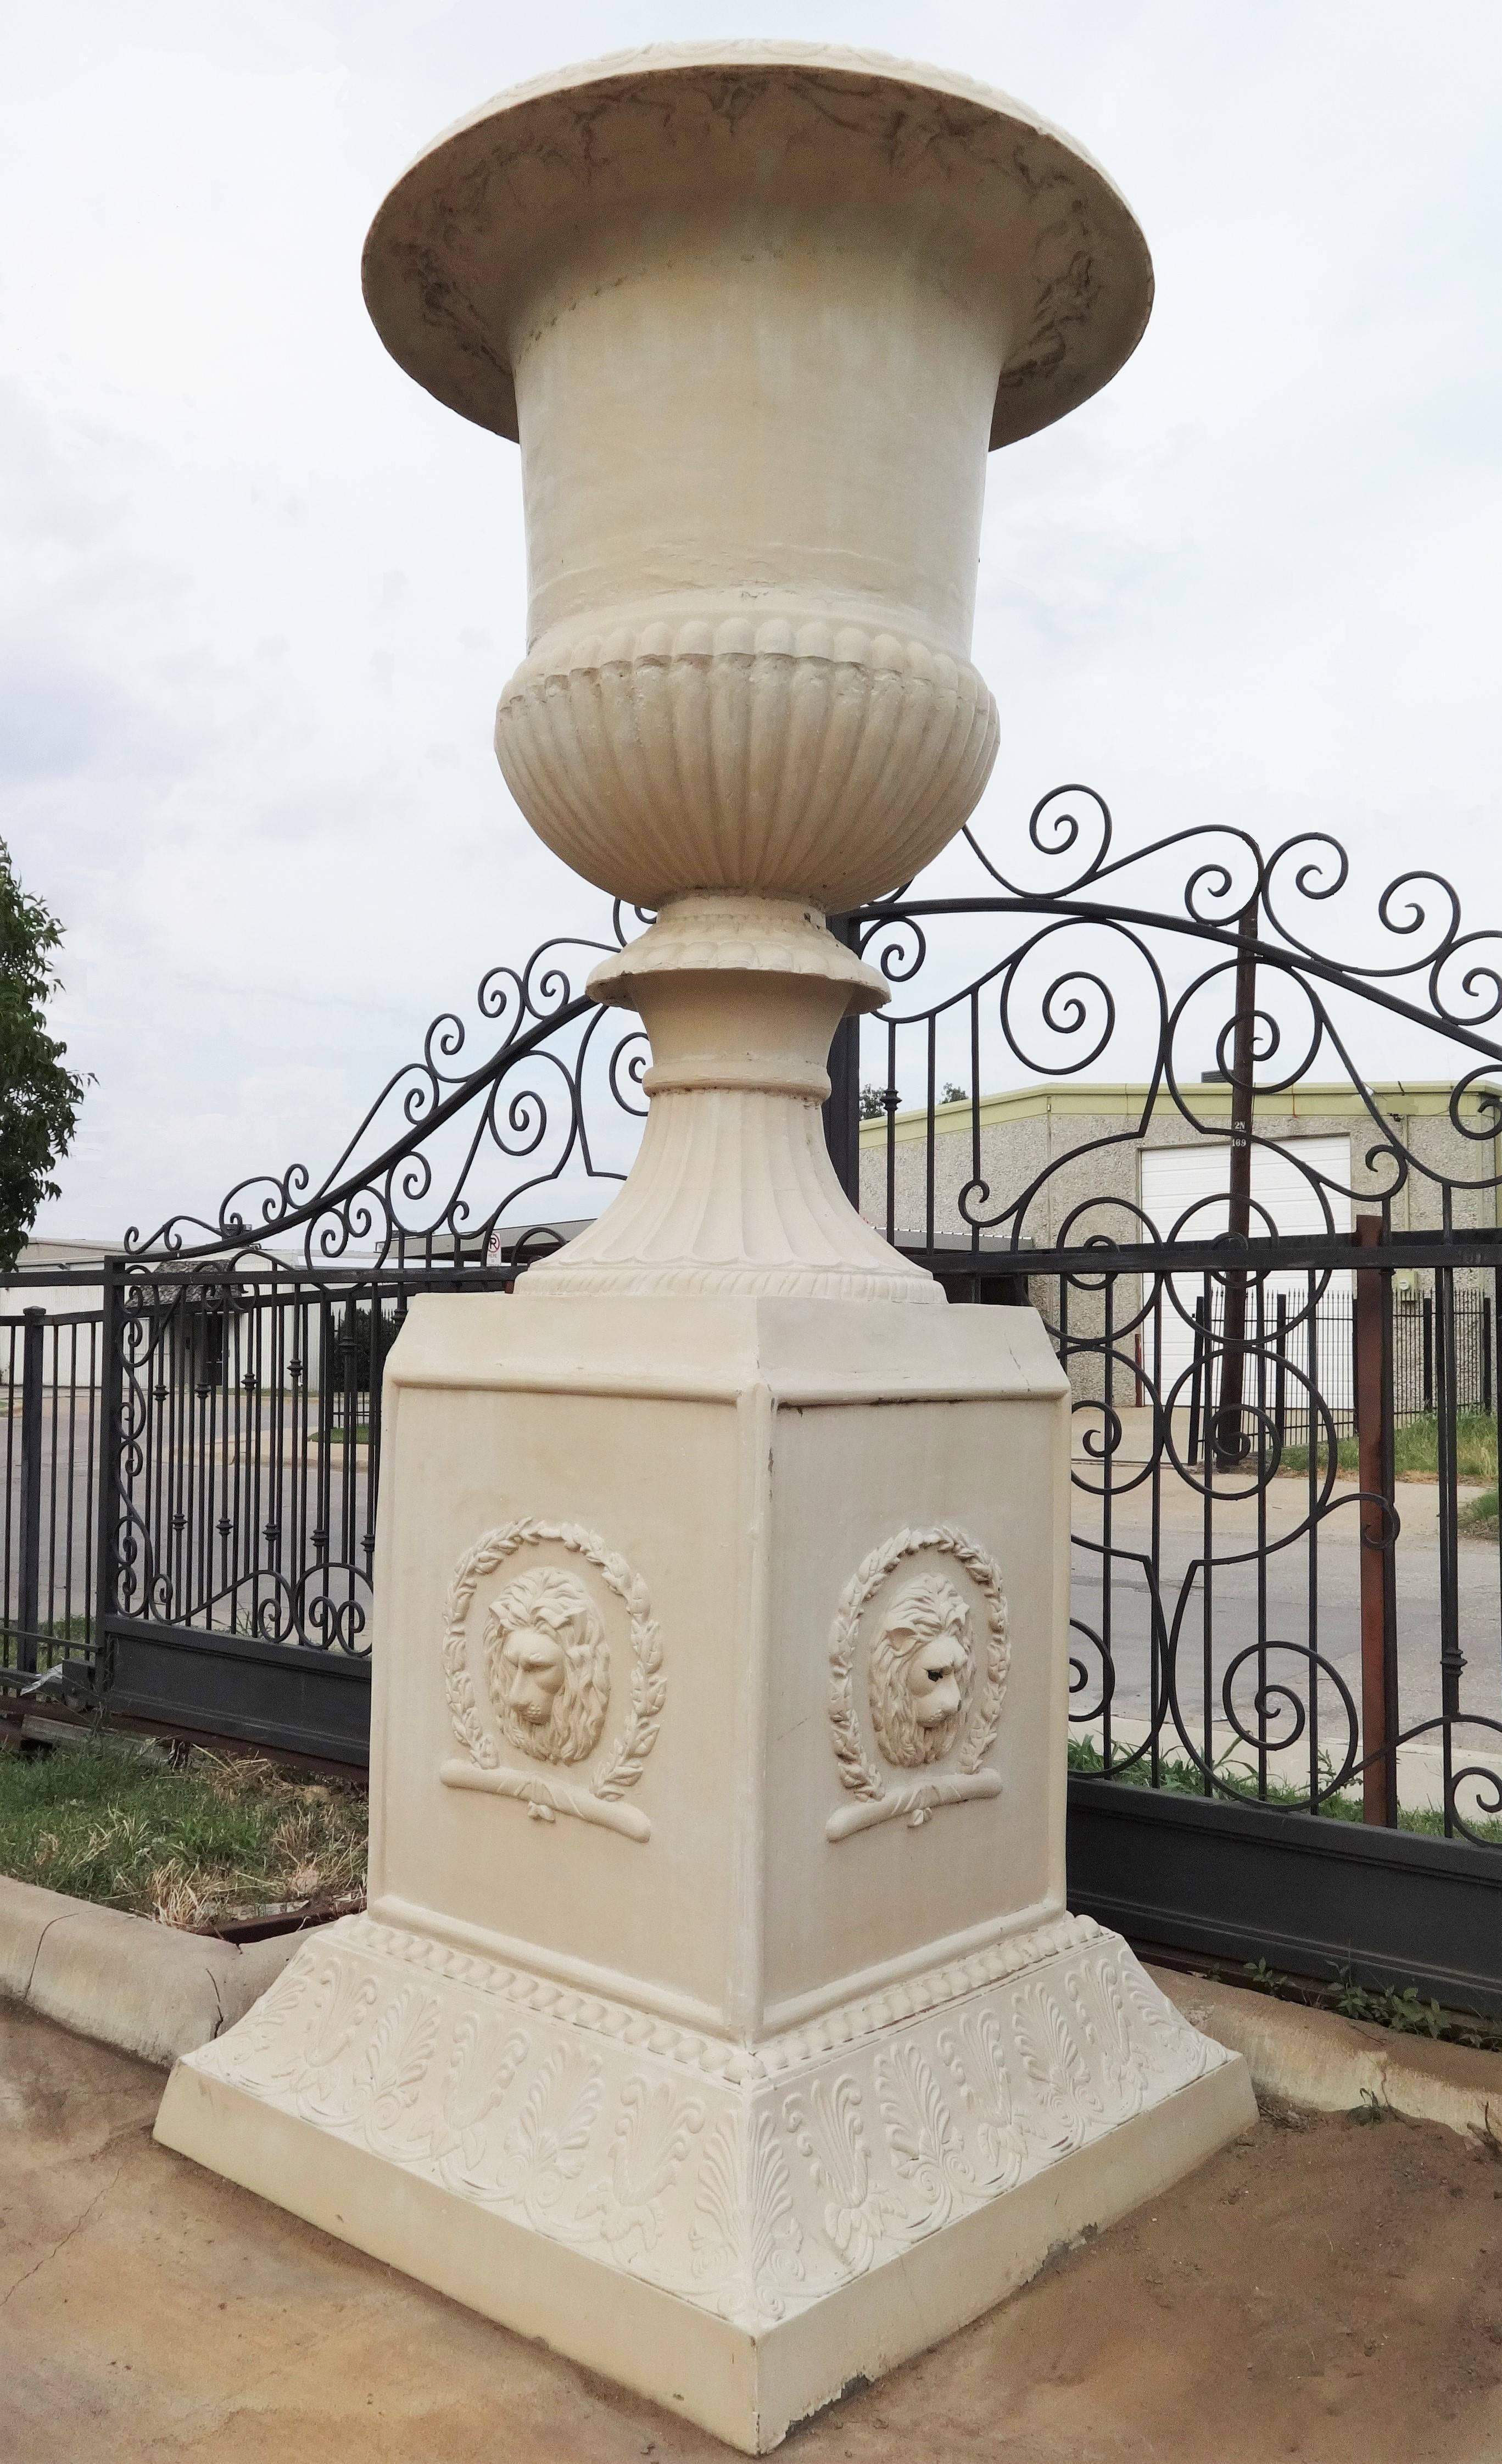 Truly magnificent, this Classic cast iron Campana urn with plain everted rims. Surmounted on a confirming cast iron plinth with decorative border and lion head wreathed panels. In perfect condition, with little weathering consistent with age. Very